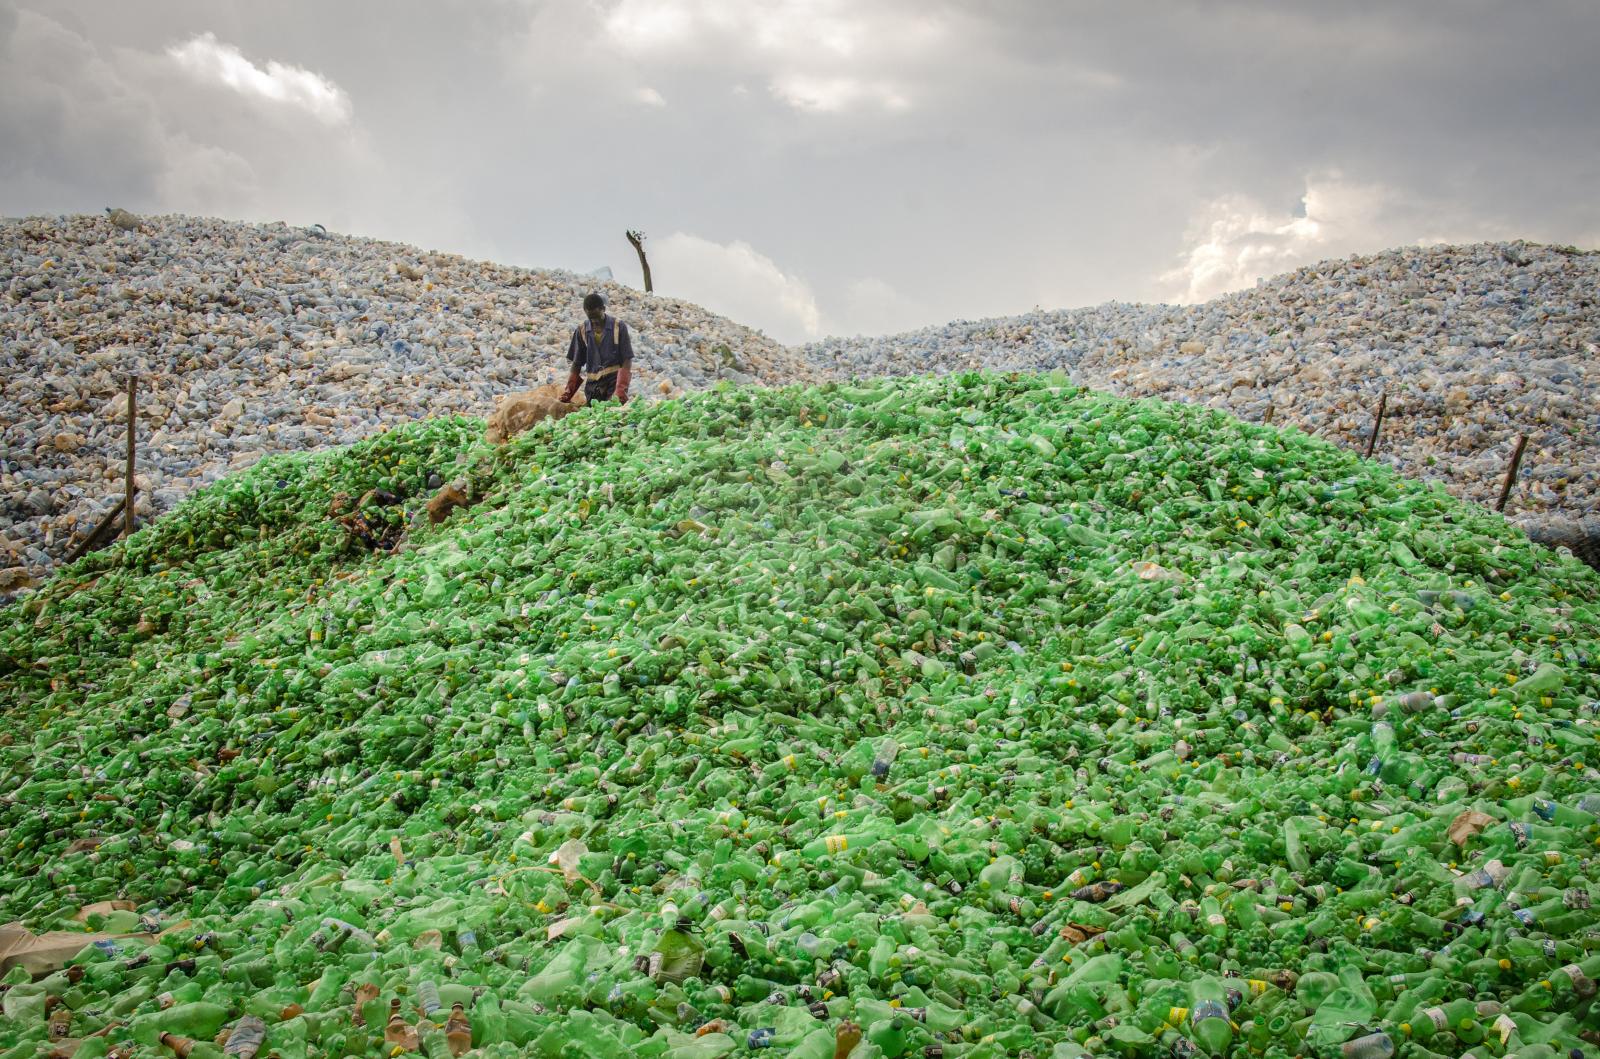 19-year old Egunyu Mark sorts through a mound of plastic bottles as he prepares them for recycling. Thousands of tonnes of waste are collecting at sites like this one in Bweyogerere, because the industry is over capacity. The recycling of plastics has greatly reduced the amount of plastics in the city though, particularly in its water channels.